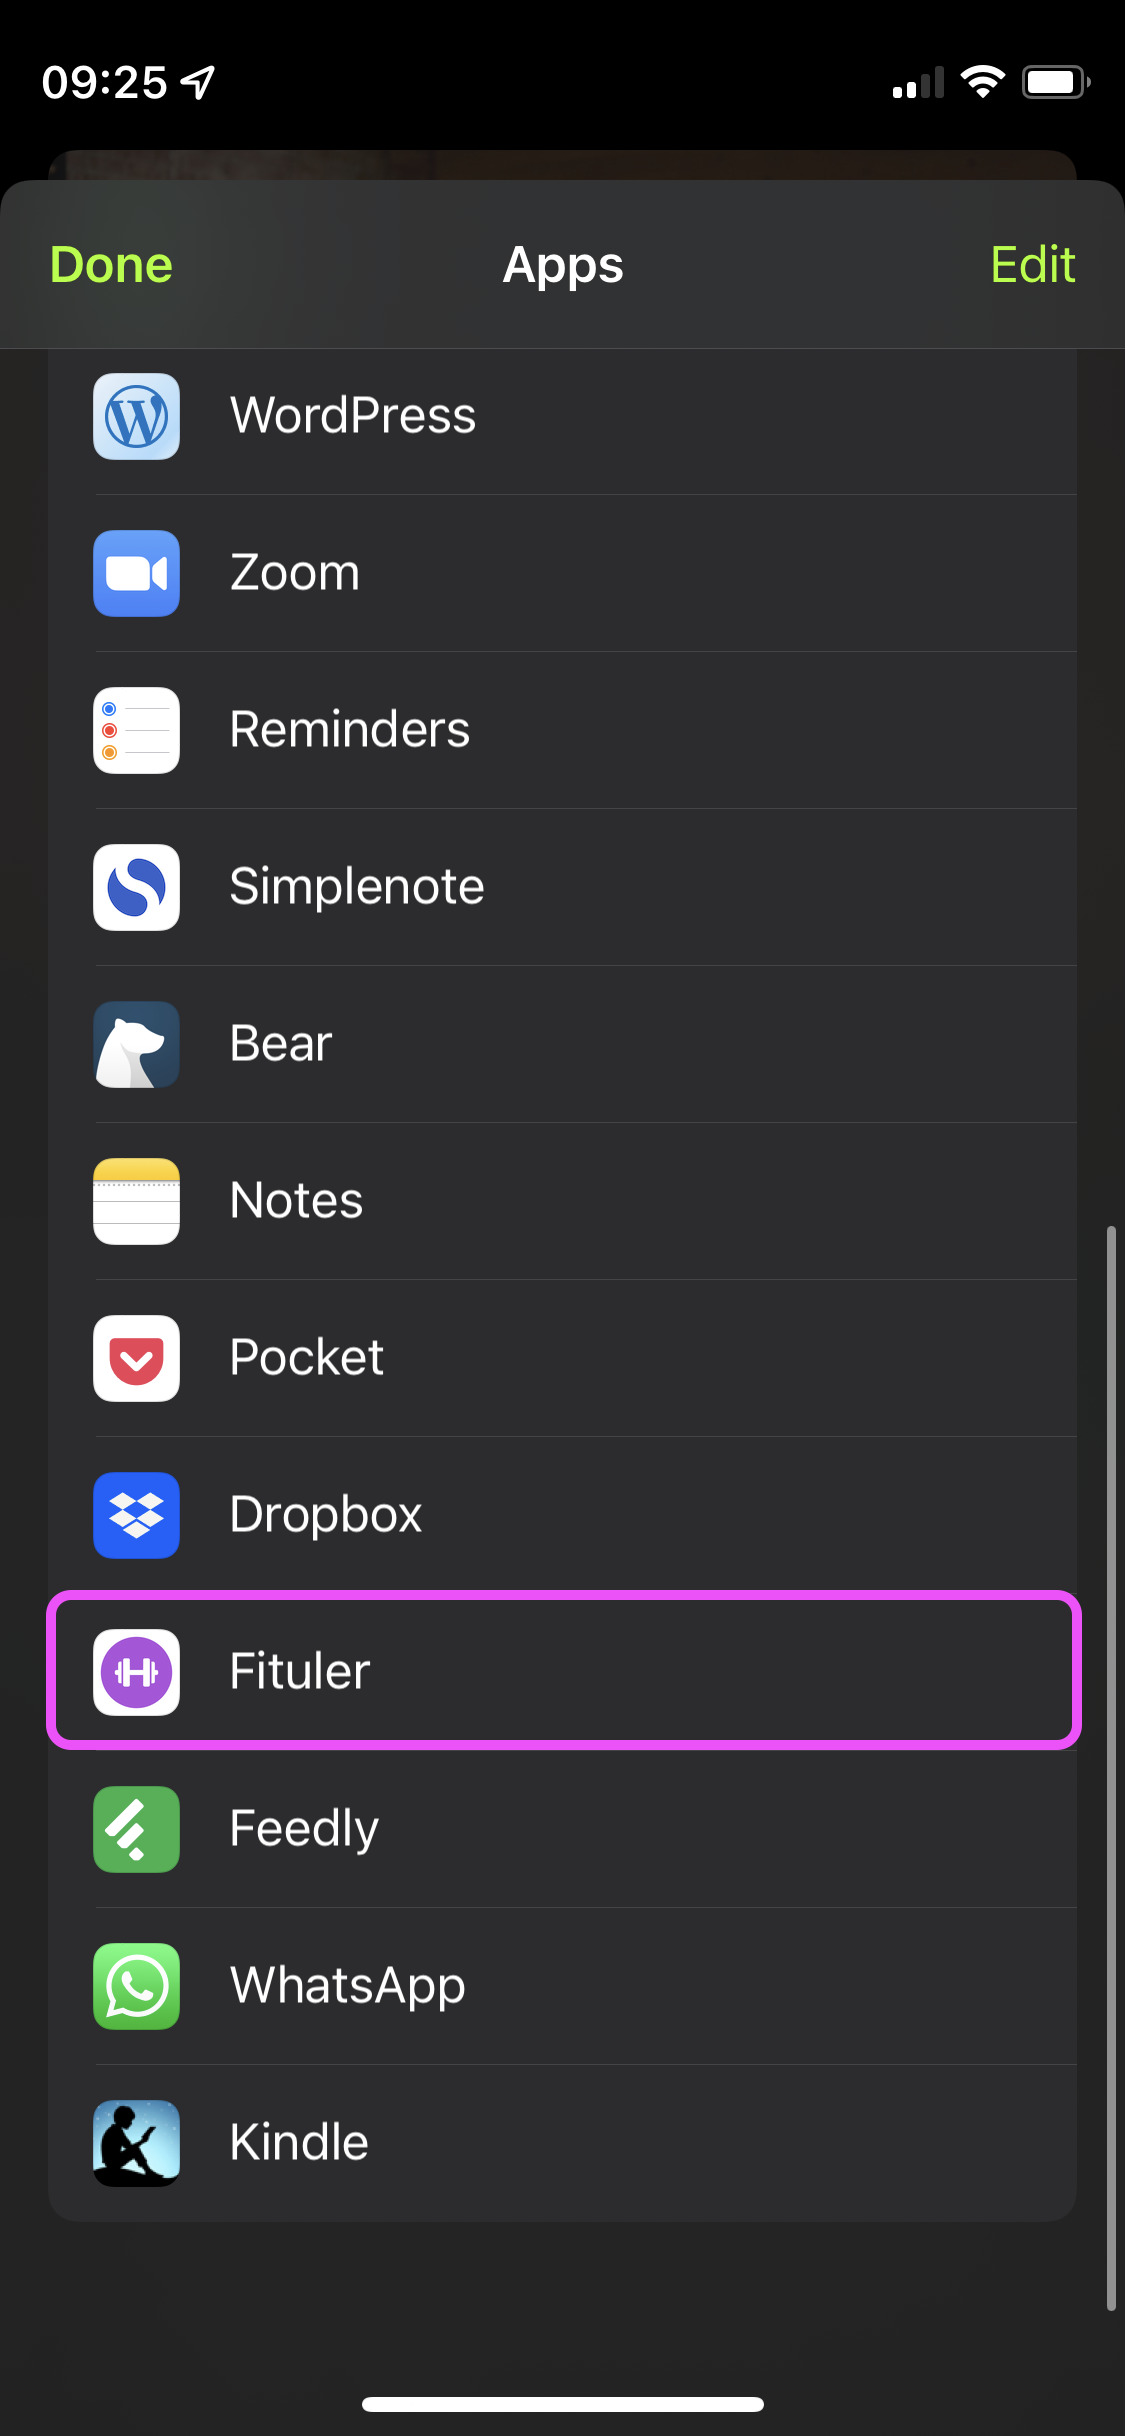 Find Fituler in the list of apps